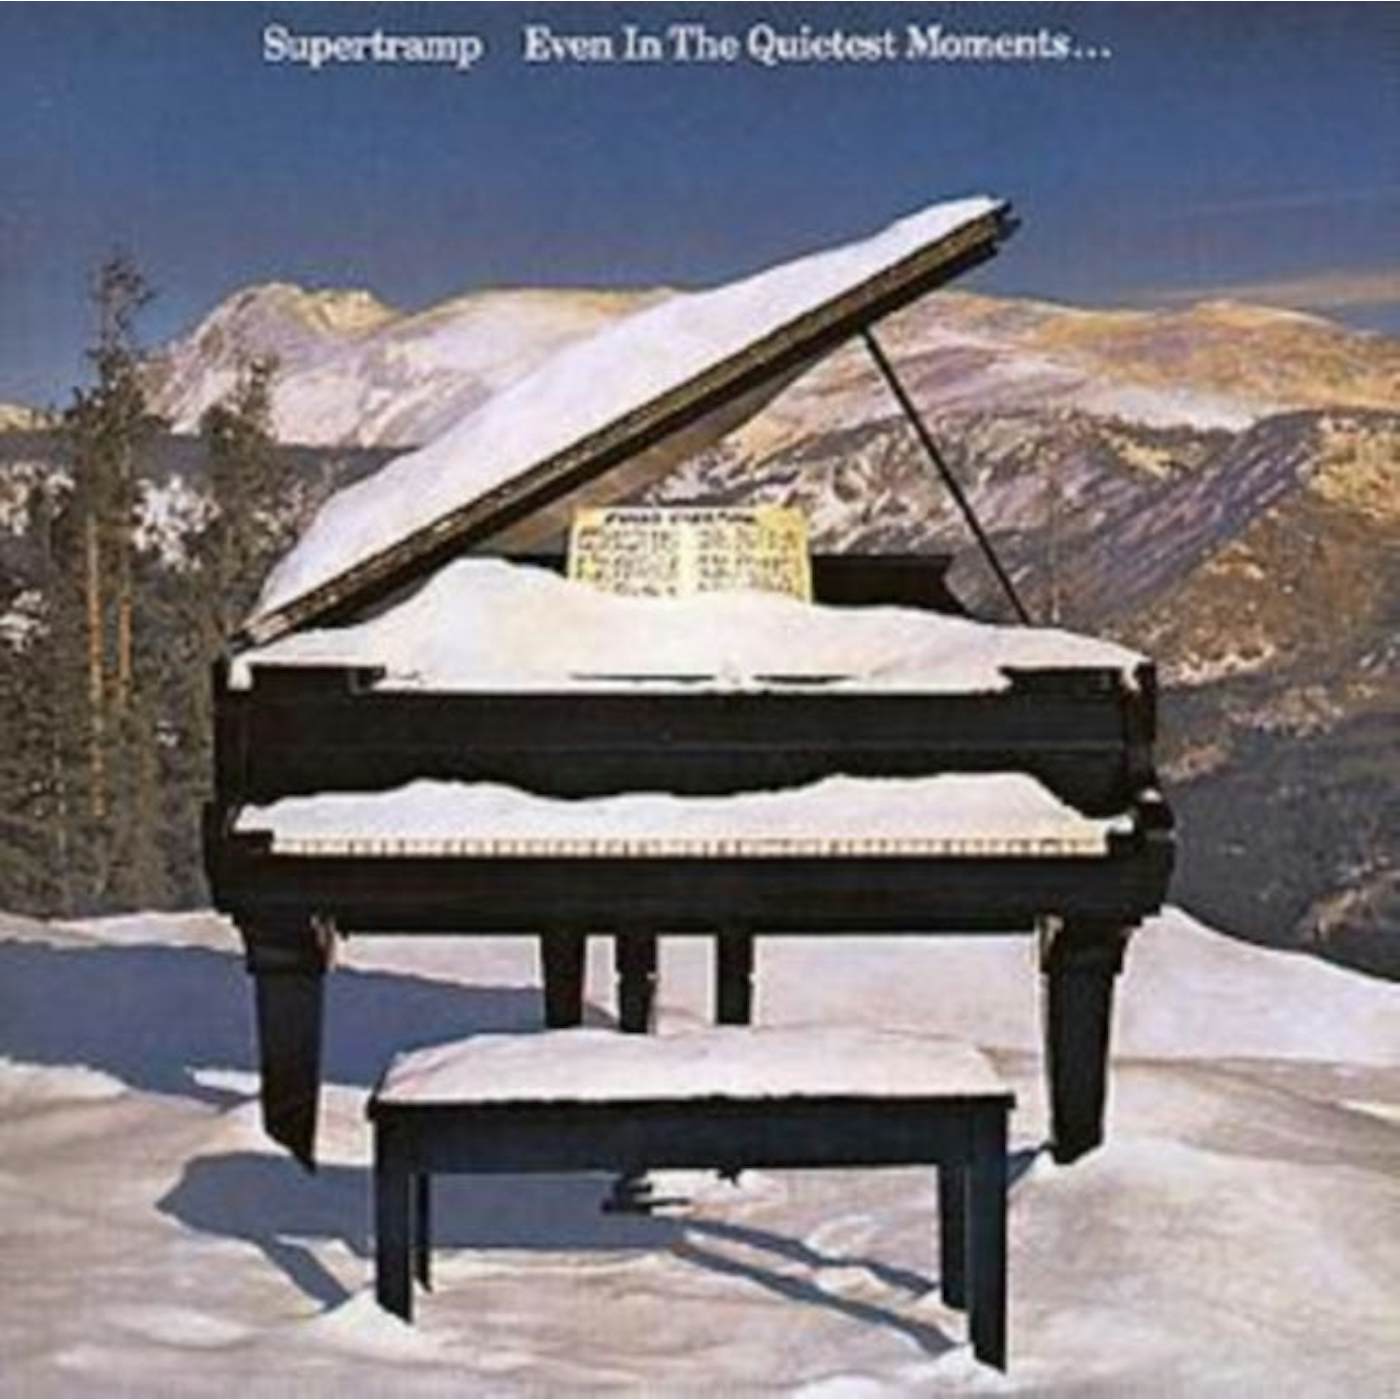 Supertramp CD - Even In The Quietest Moments